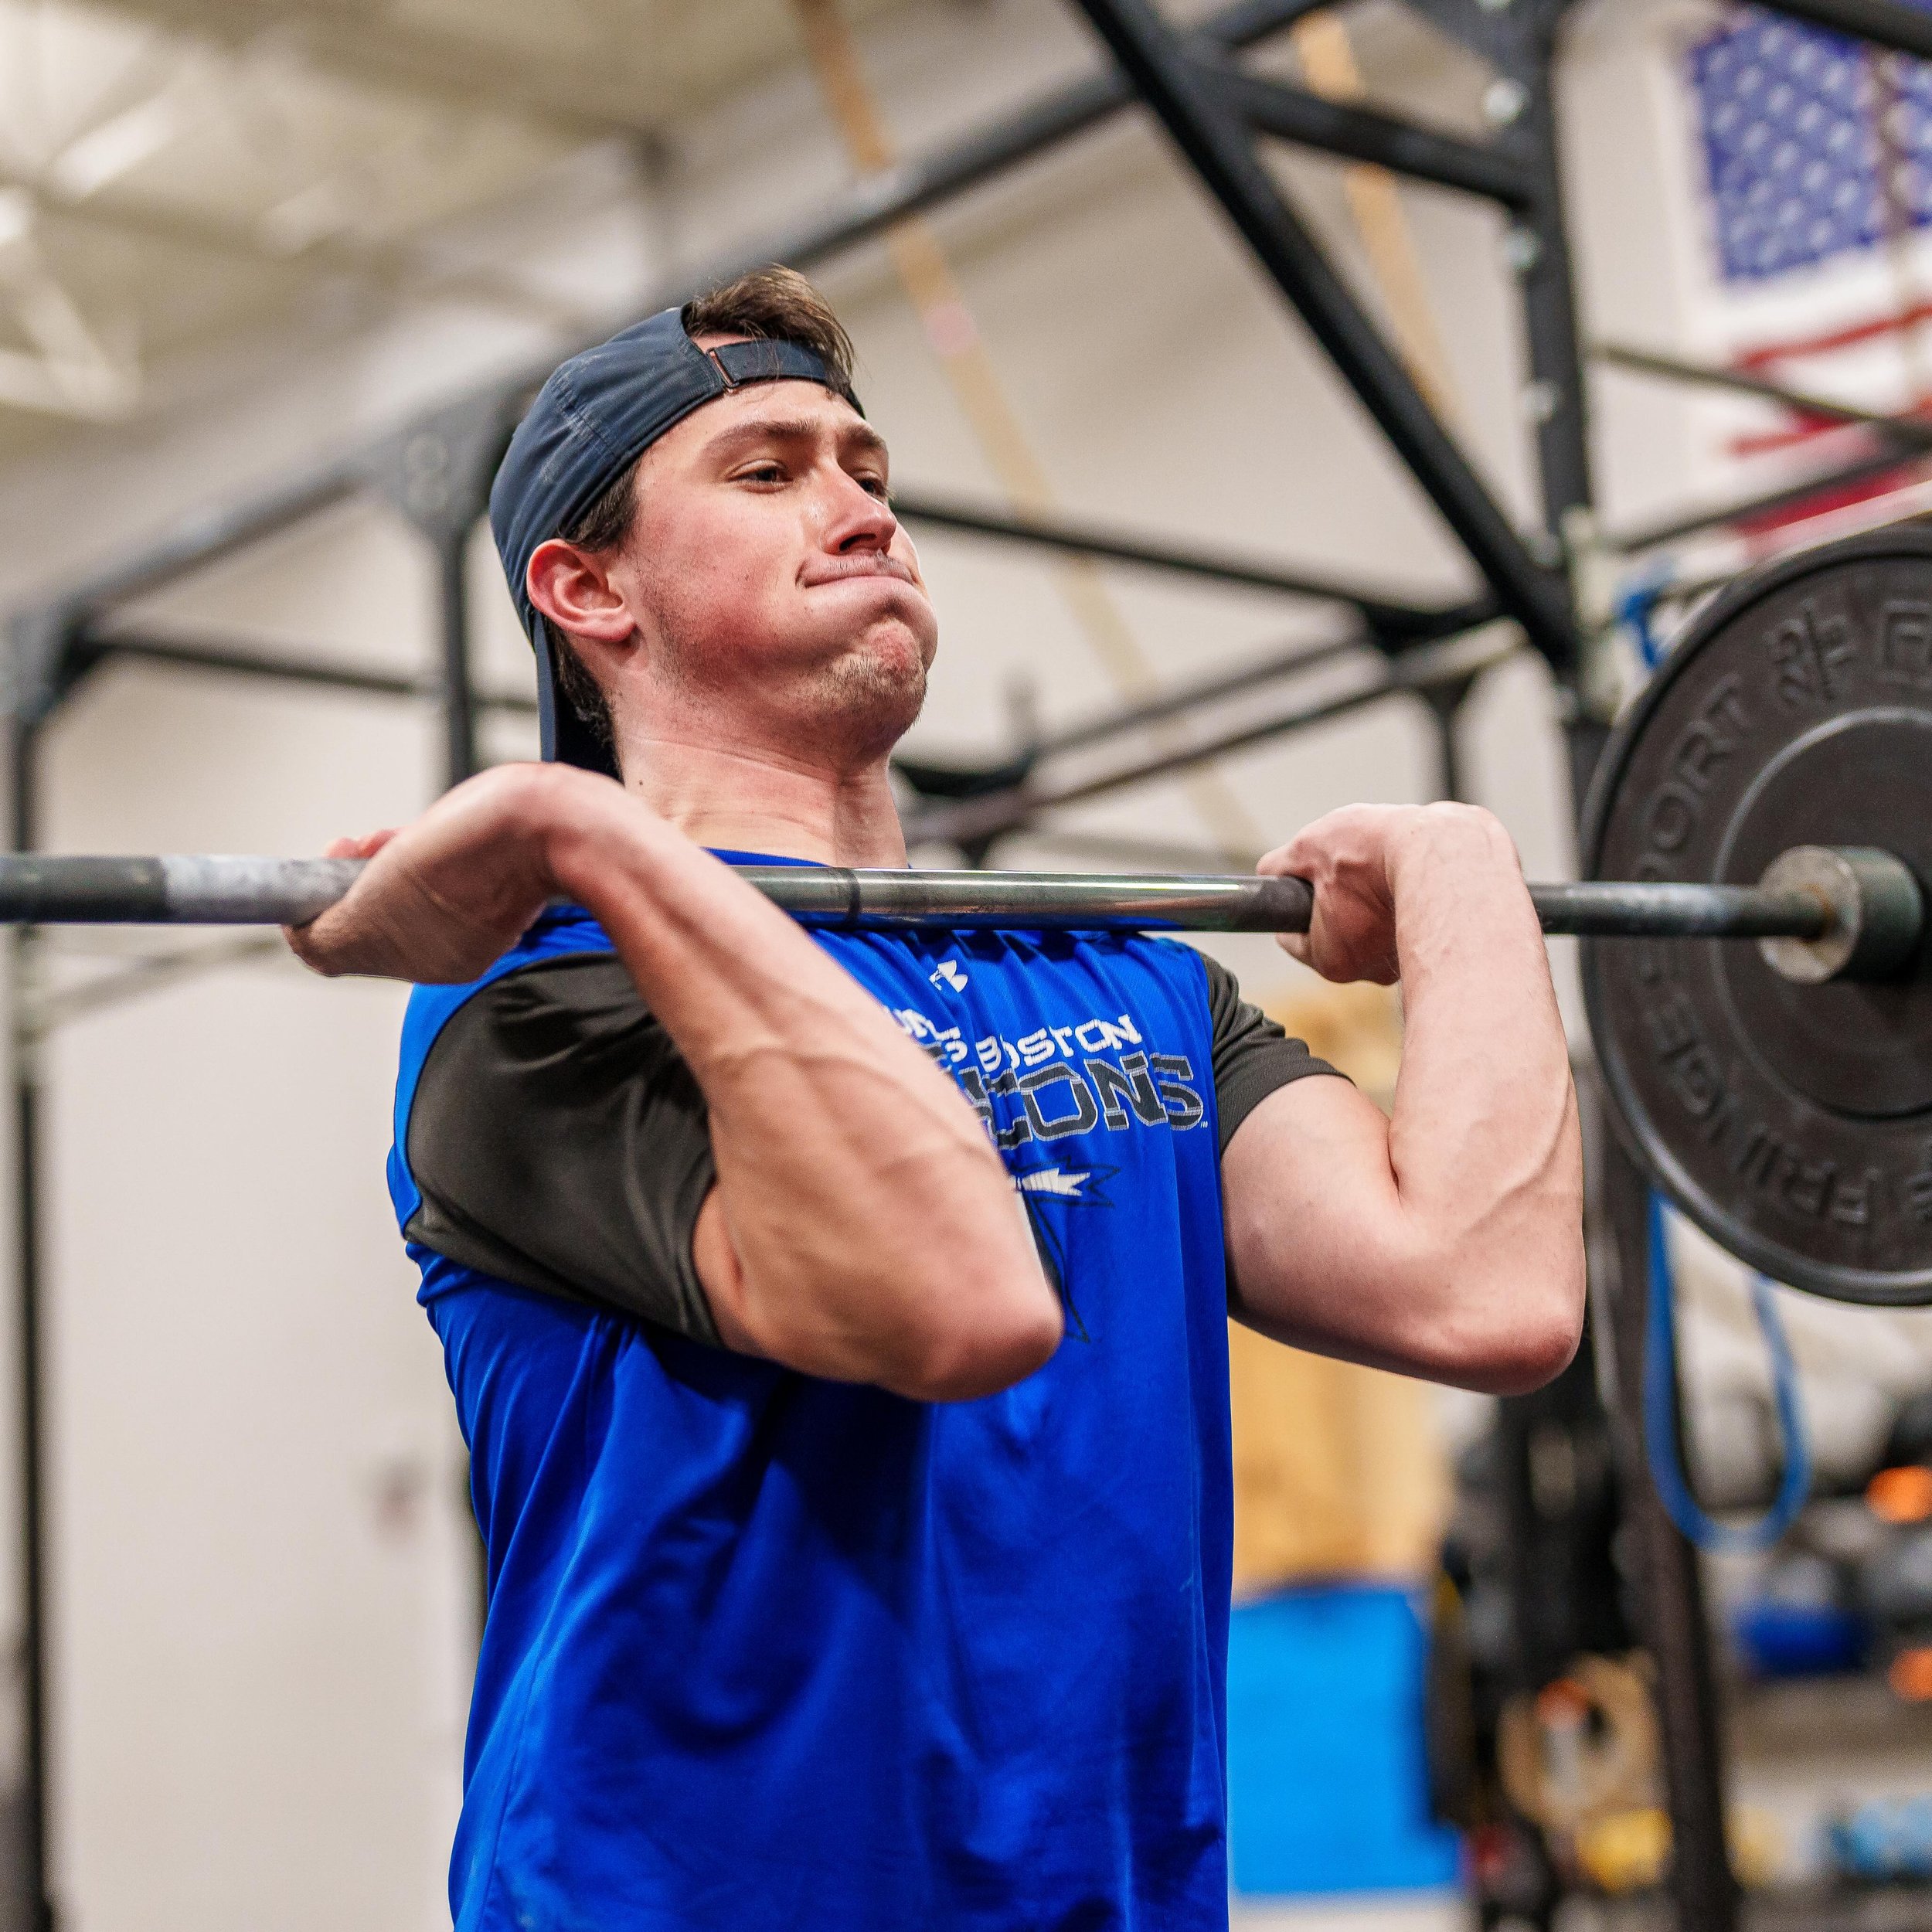 Form Matters 🔥

When it comes to maximizing the front squat, understanding &amp; perfecting position makes a huge difference.

Check out our teams four top tips for Front Squat gains 💪

🤘Breathing &amp; Bracing - breath in deep and low BEFORE you 